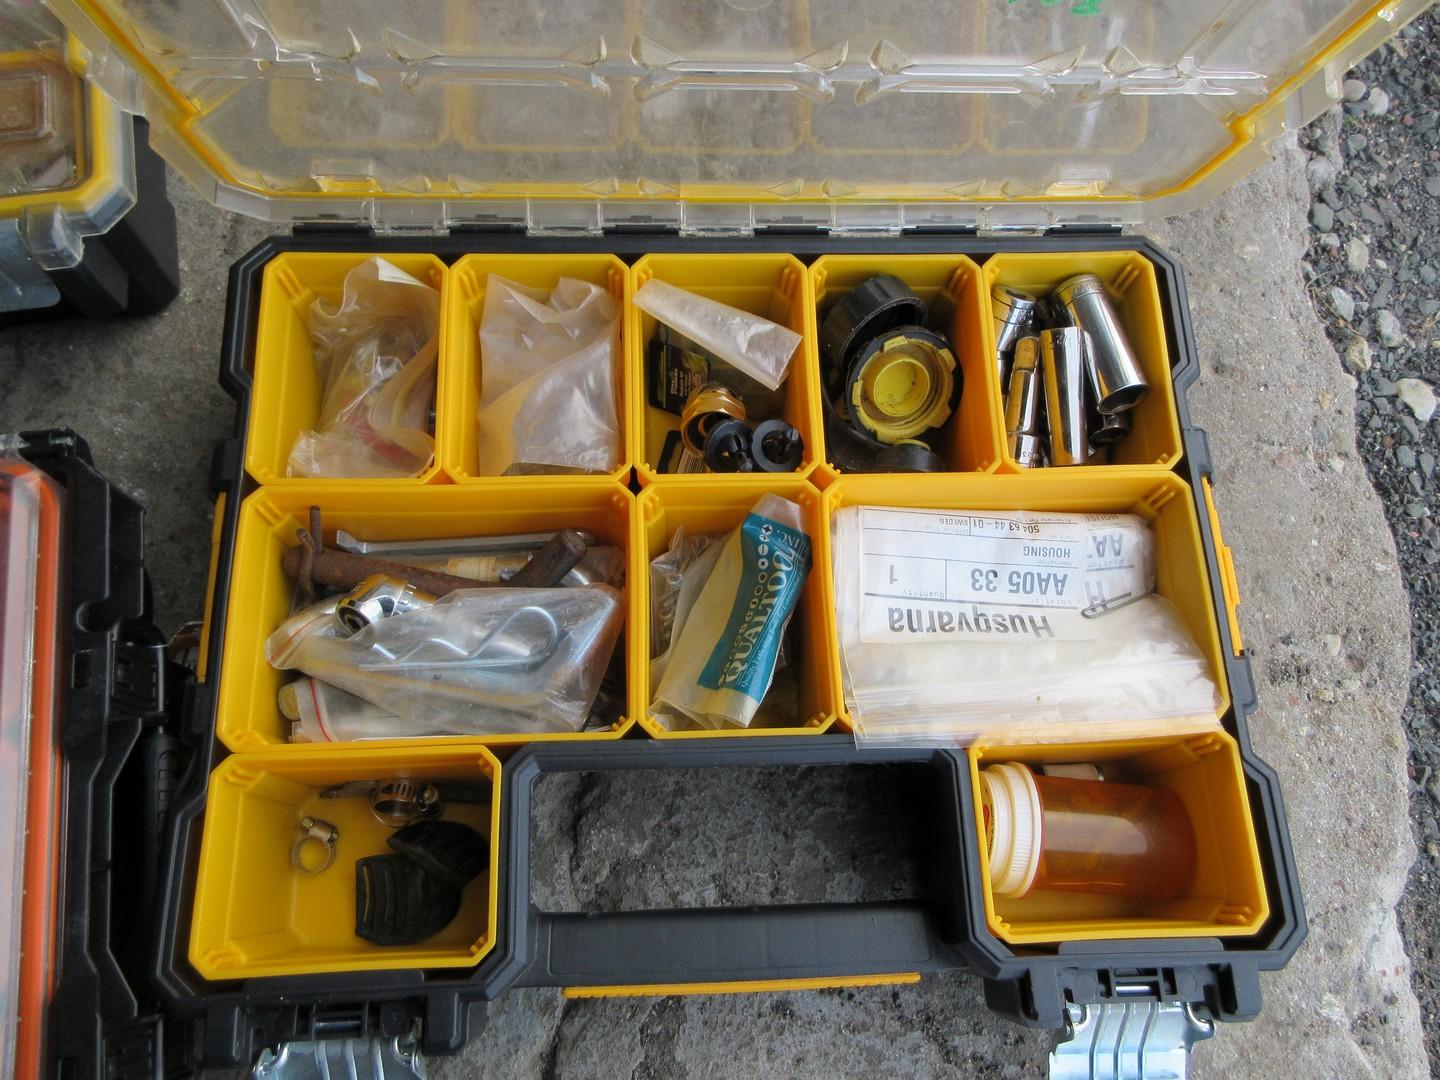 Quantity of Plastic Tool Boxes With Contents